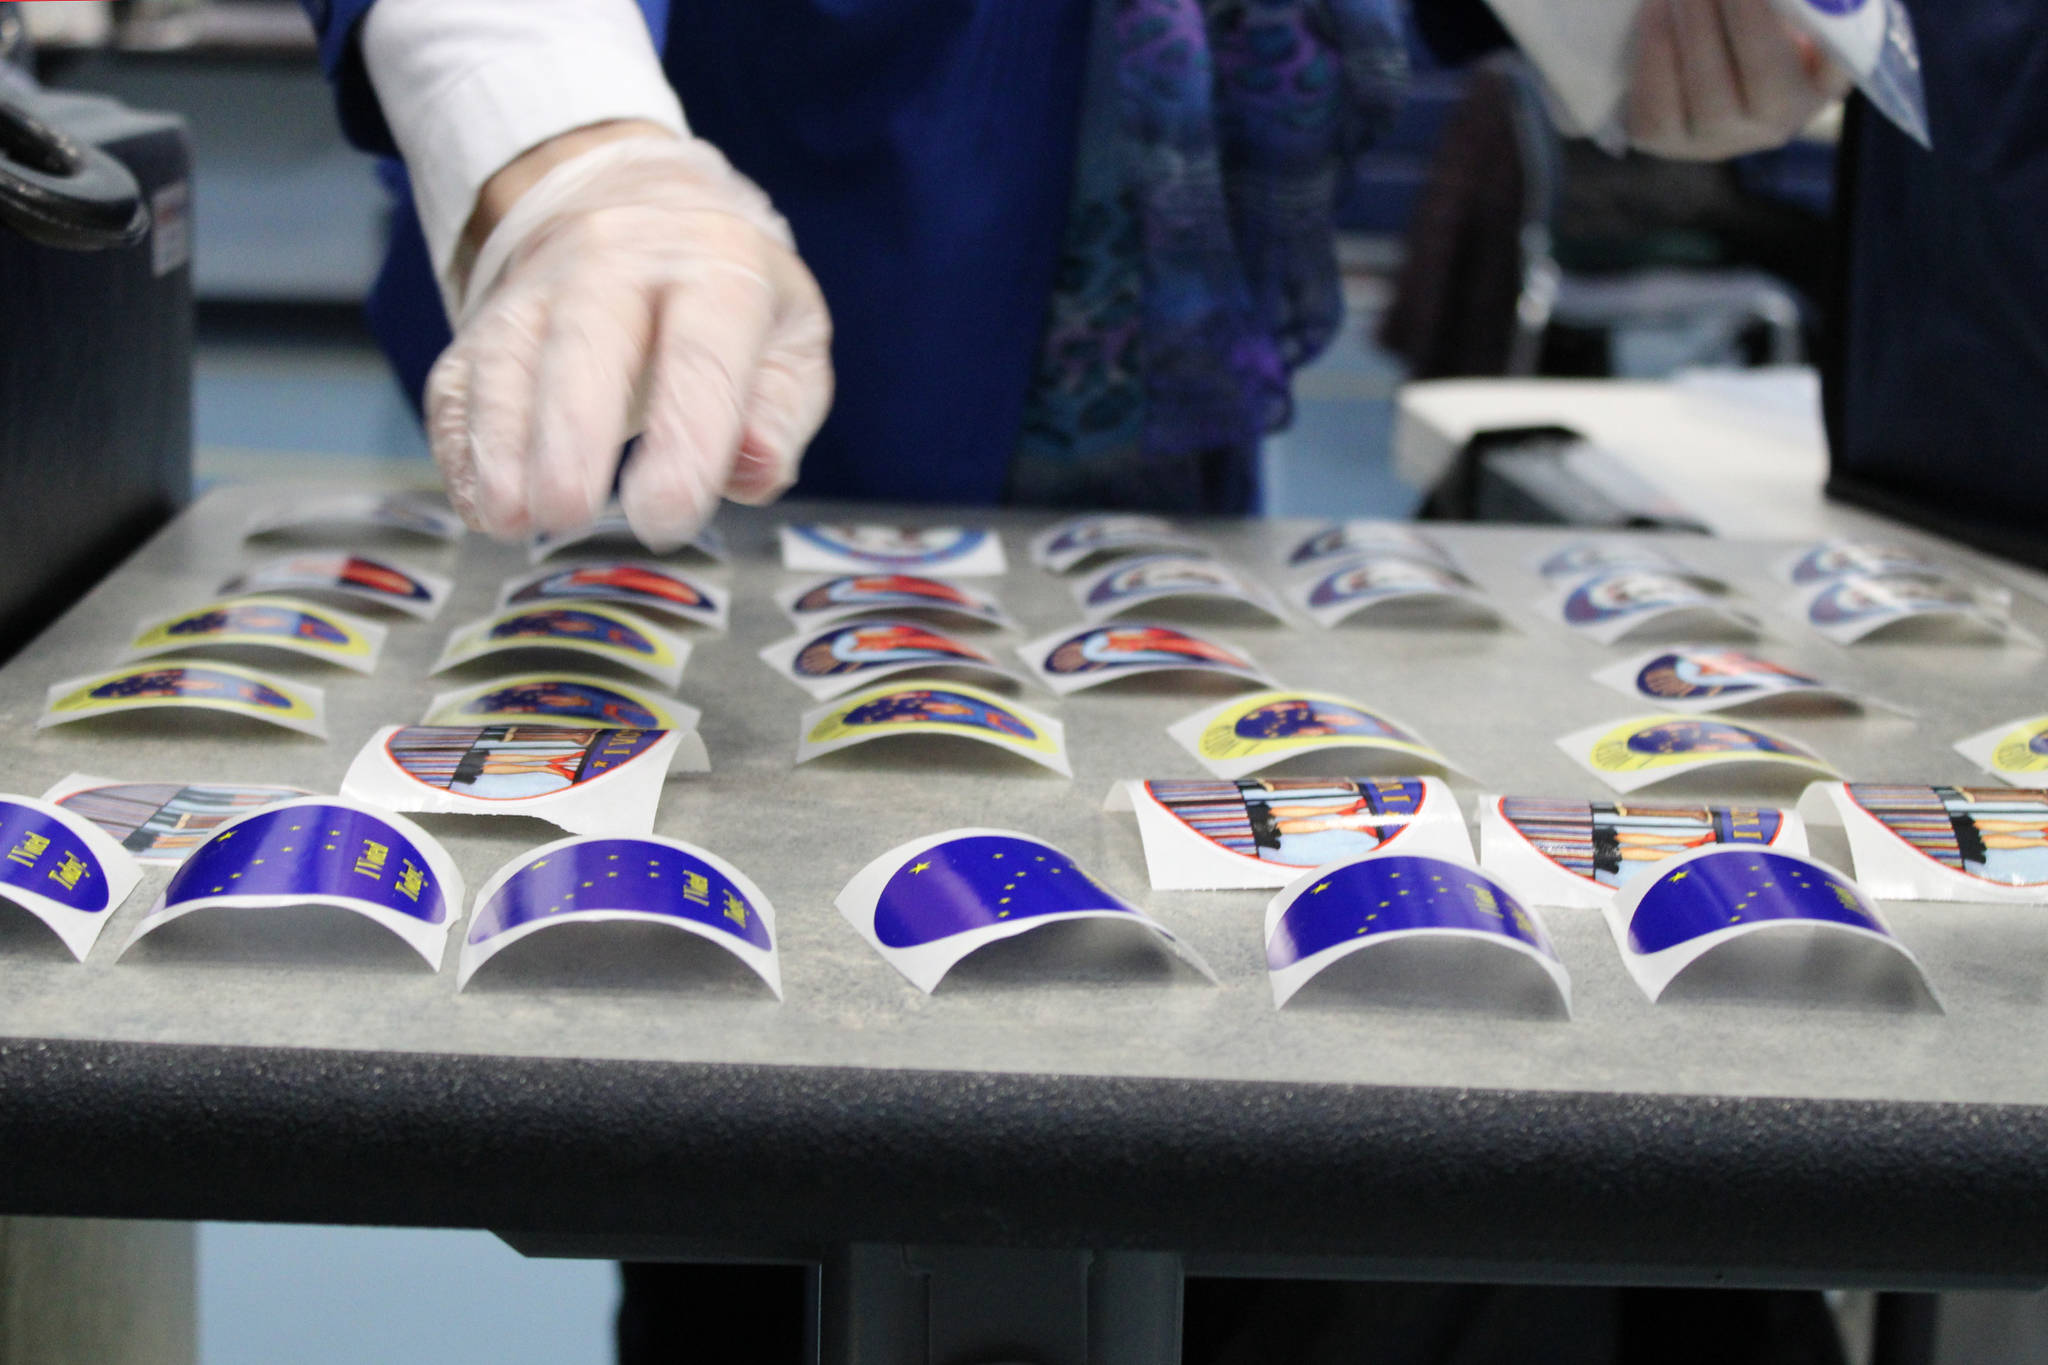 An election official lays out “I voted” stickers on Tuesday, Nov. 3. Stickers for the 2020 general election featured designs by Alaskan artist Barbara Lavallee. (Ben Hohenstatt / Juneau Empire)